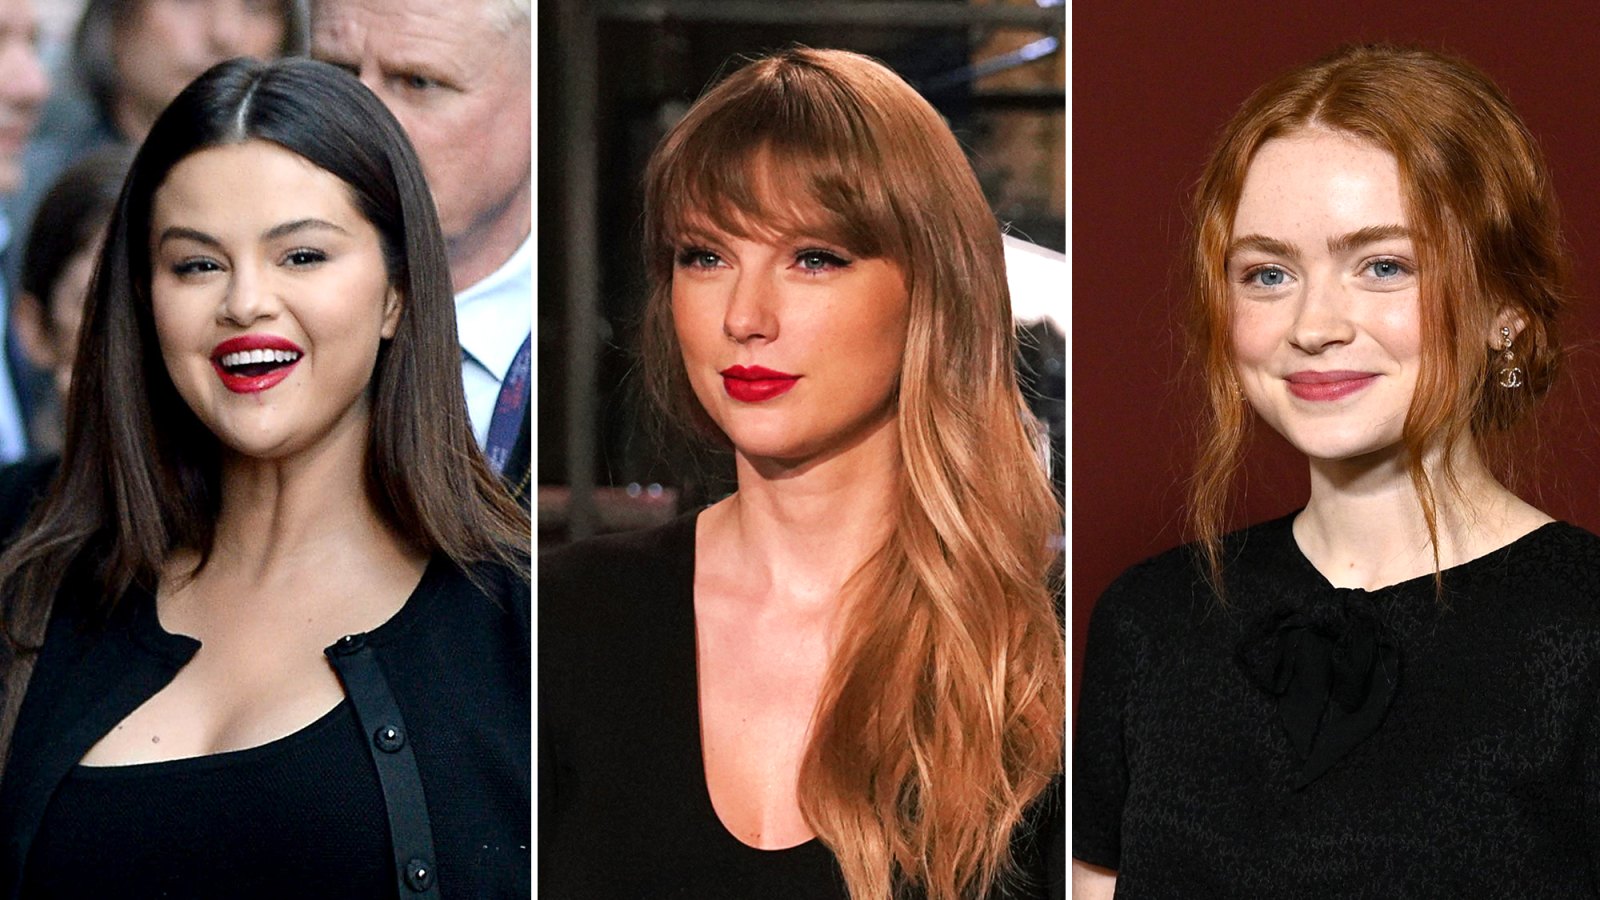 Squad Goals! Selena Gomez and Sadie Sink Sweetly Support Taylor Swift Backstage at ‘SNL’